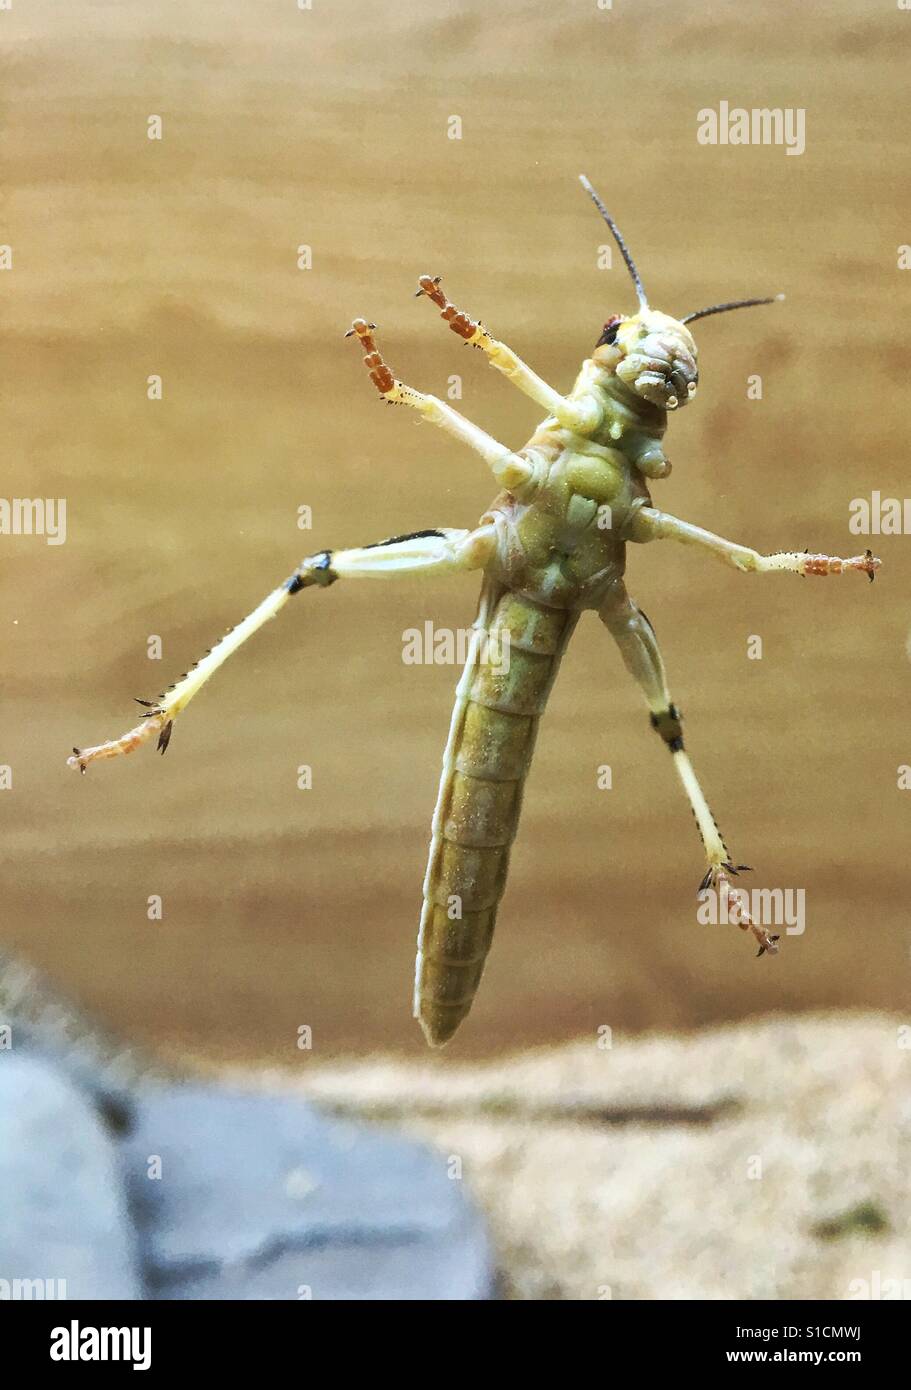 Locust attemting to climb up a glass door. Stock Photo